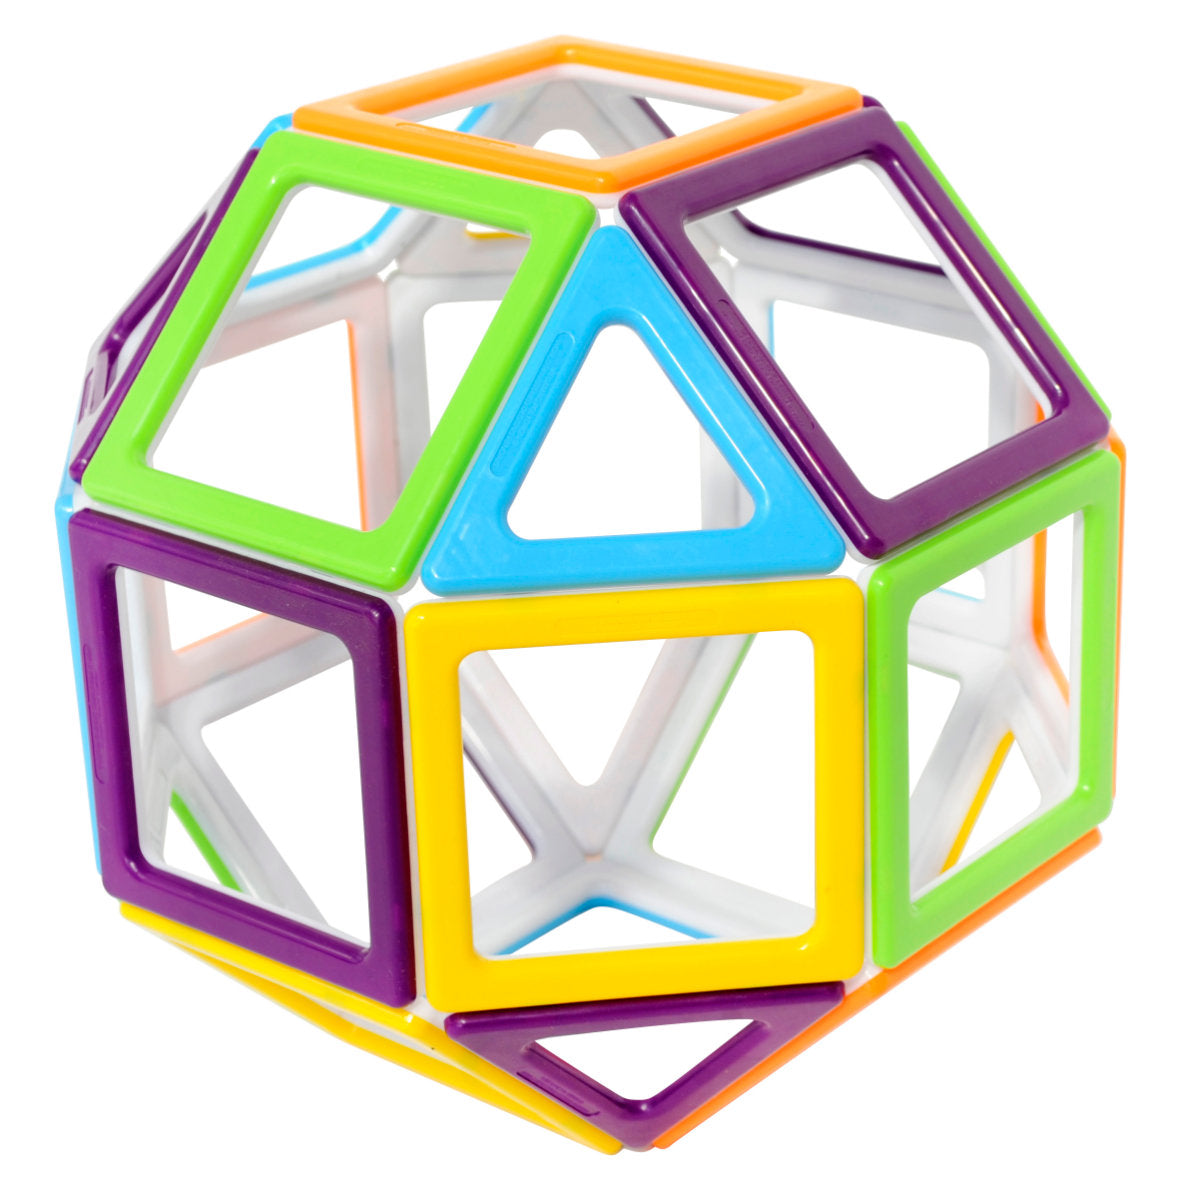 Mega Mag Polydron Set, Unlock the world of geometry and shape exploration with the Mega Mag Polydron Set. Perfect for small groups or individual students, this set is designed to create both 2D and 3D shapes using magnetic pieces - allowing for a hands-on learning experience.The 36-piece set includes 20 squares and 16 triangles, providing enough pieces to build a variety of shapes and structures. With these magnetic pieces, students are encouraged to explore geometry and identify the properties of 2D and 3D